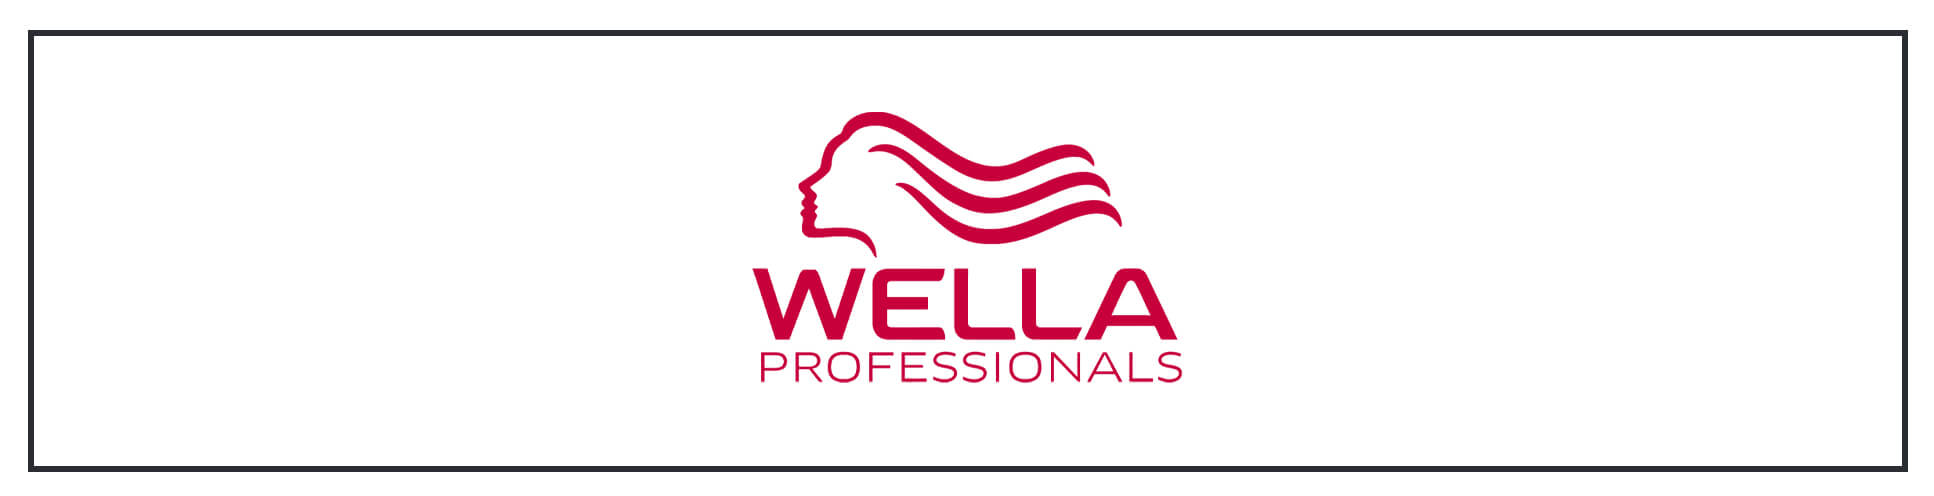 Wella professionals logo on a white background.